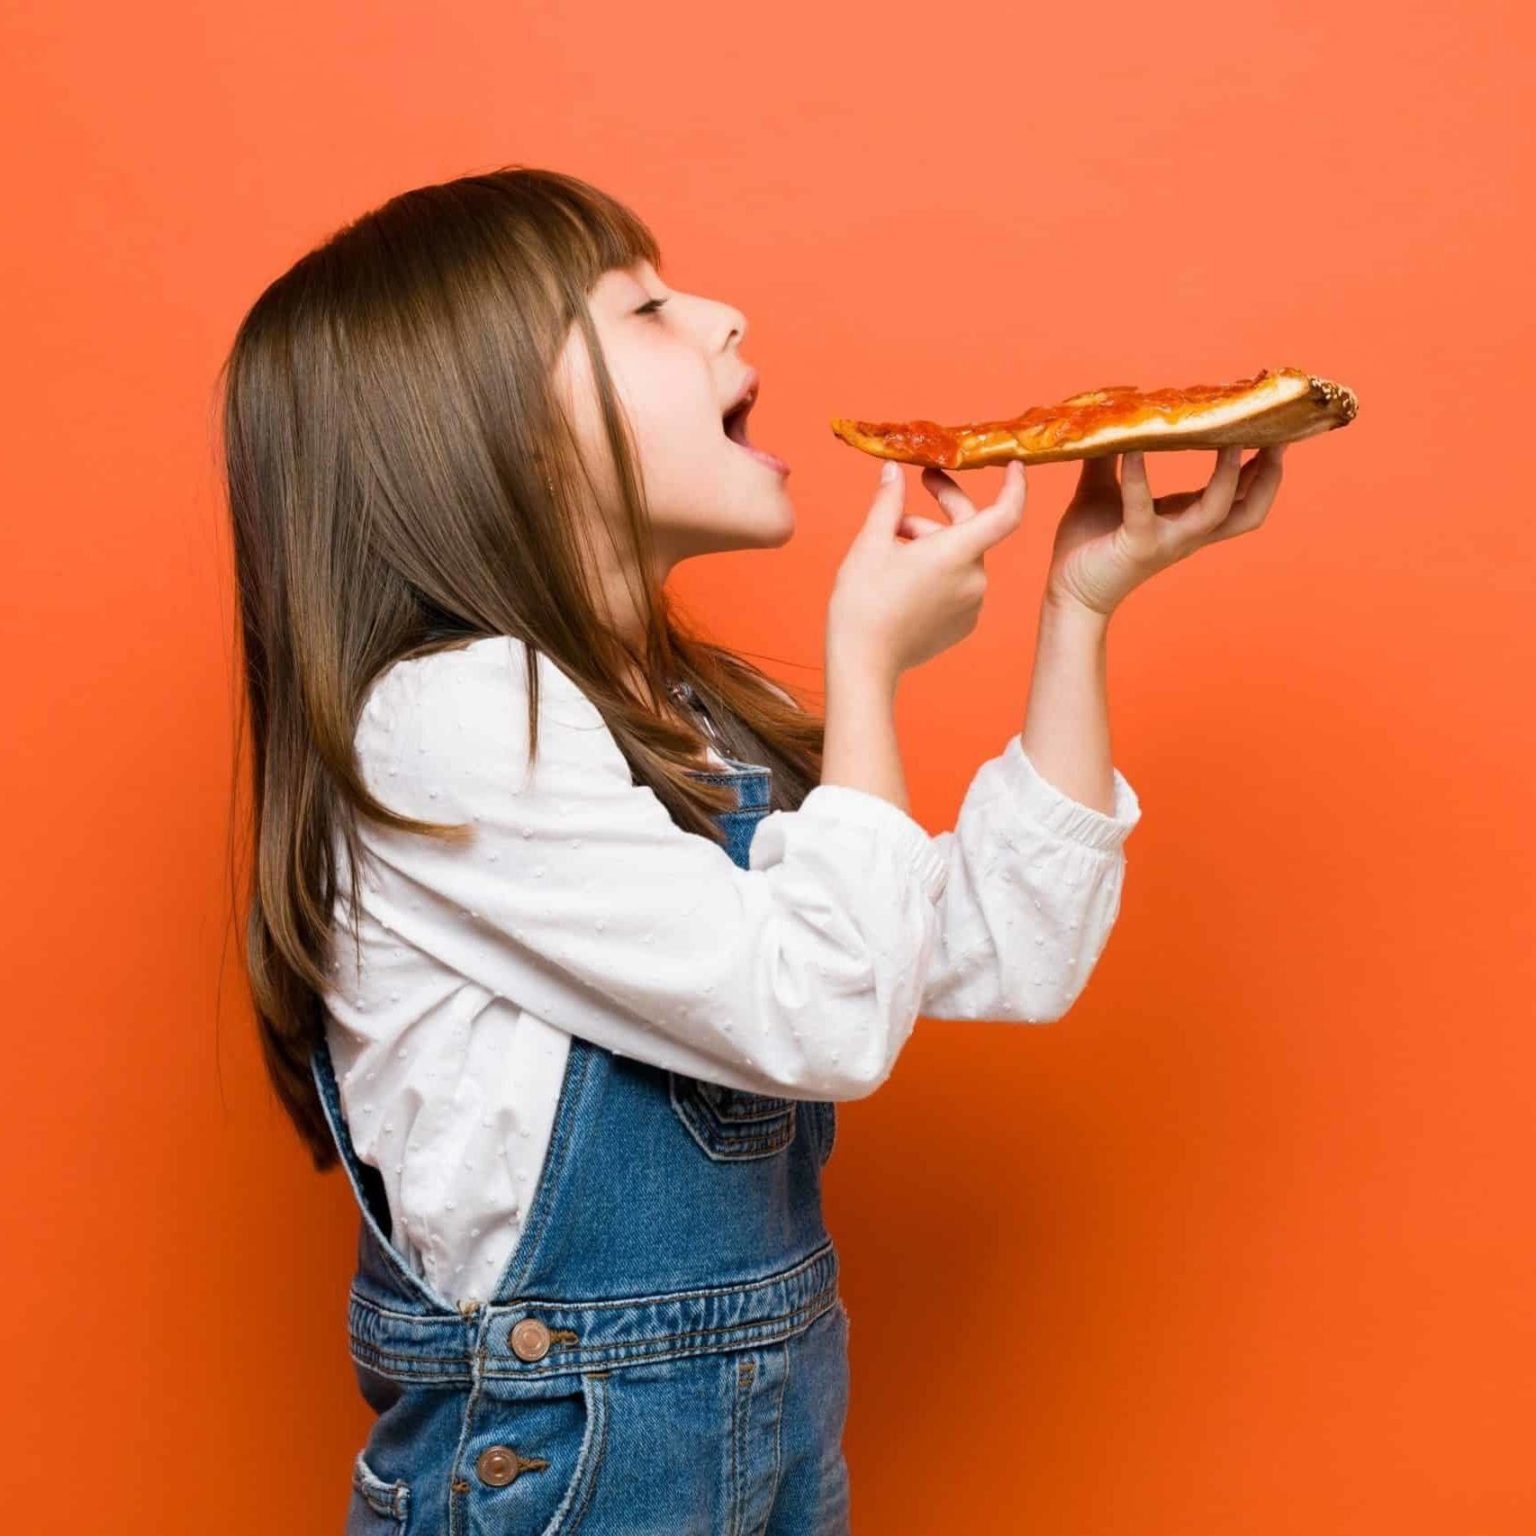 young female student with brown hair enjoying slice of pizza